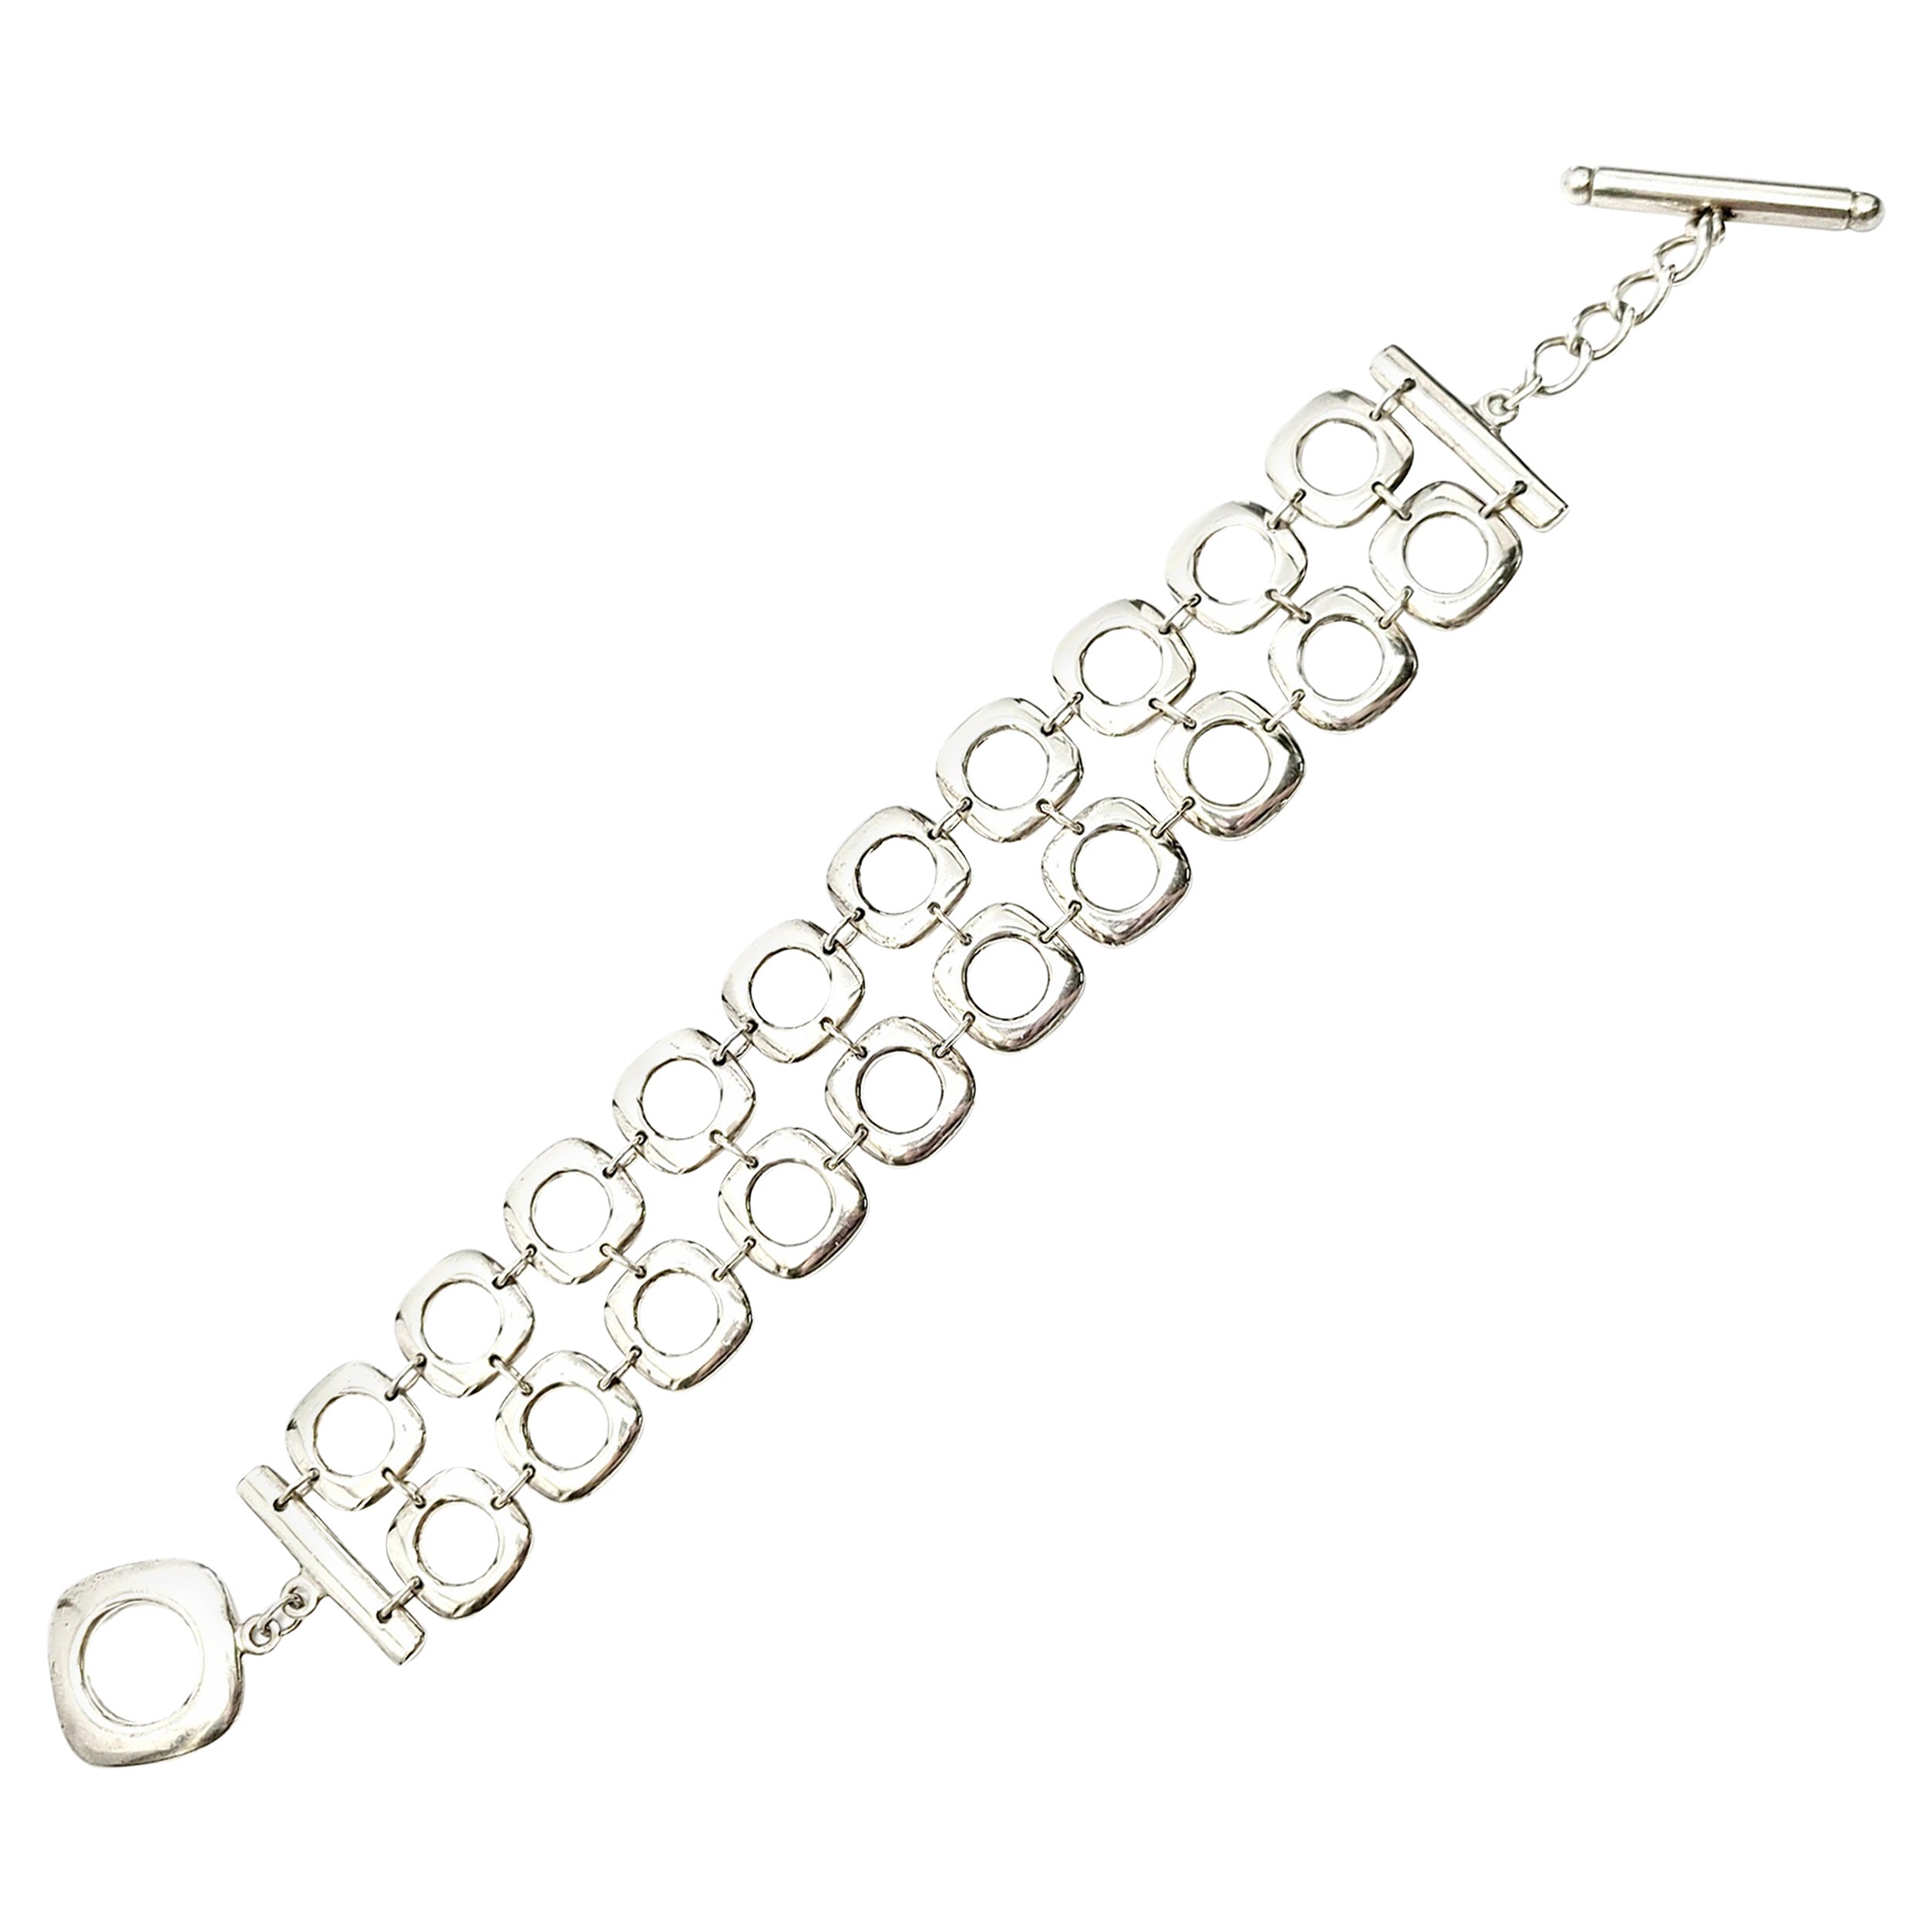 Tiffany & Co. Sterling Silver Double Row Square Cushion Link Bracelet